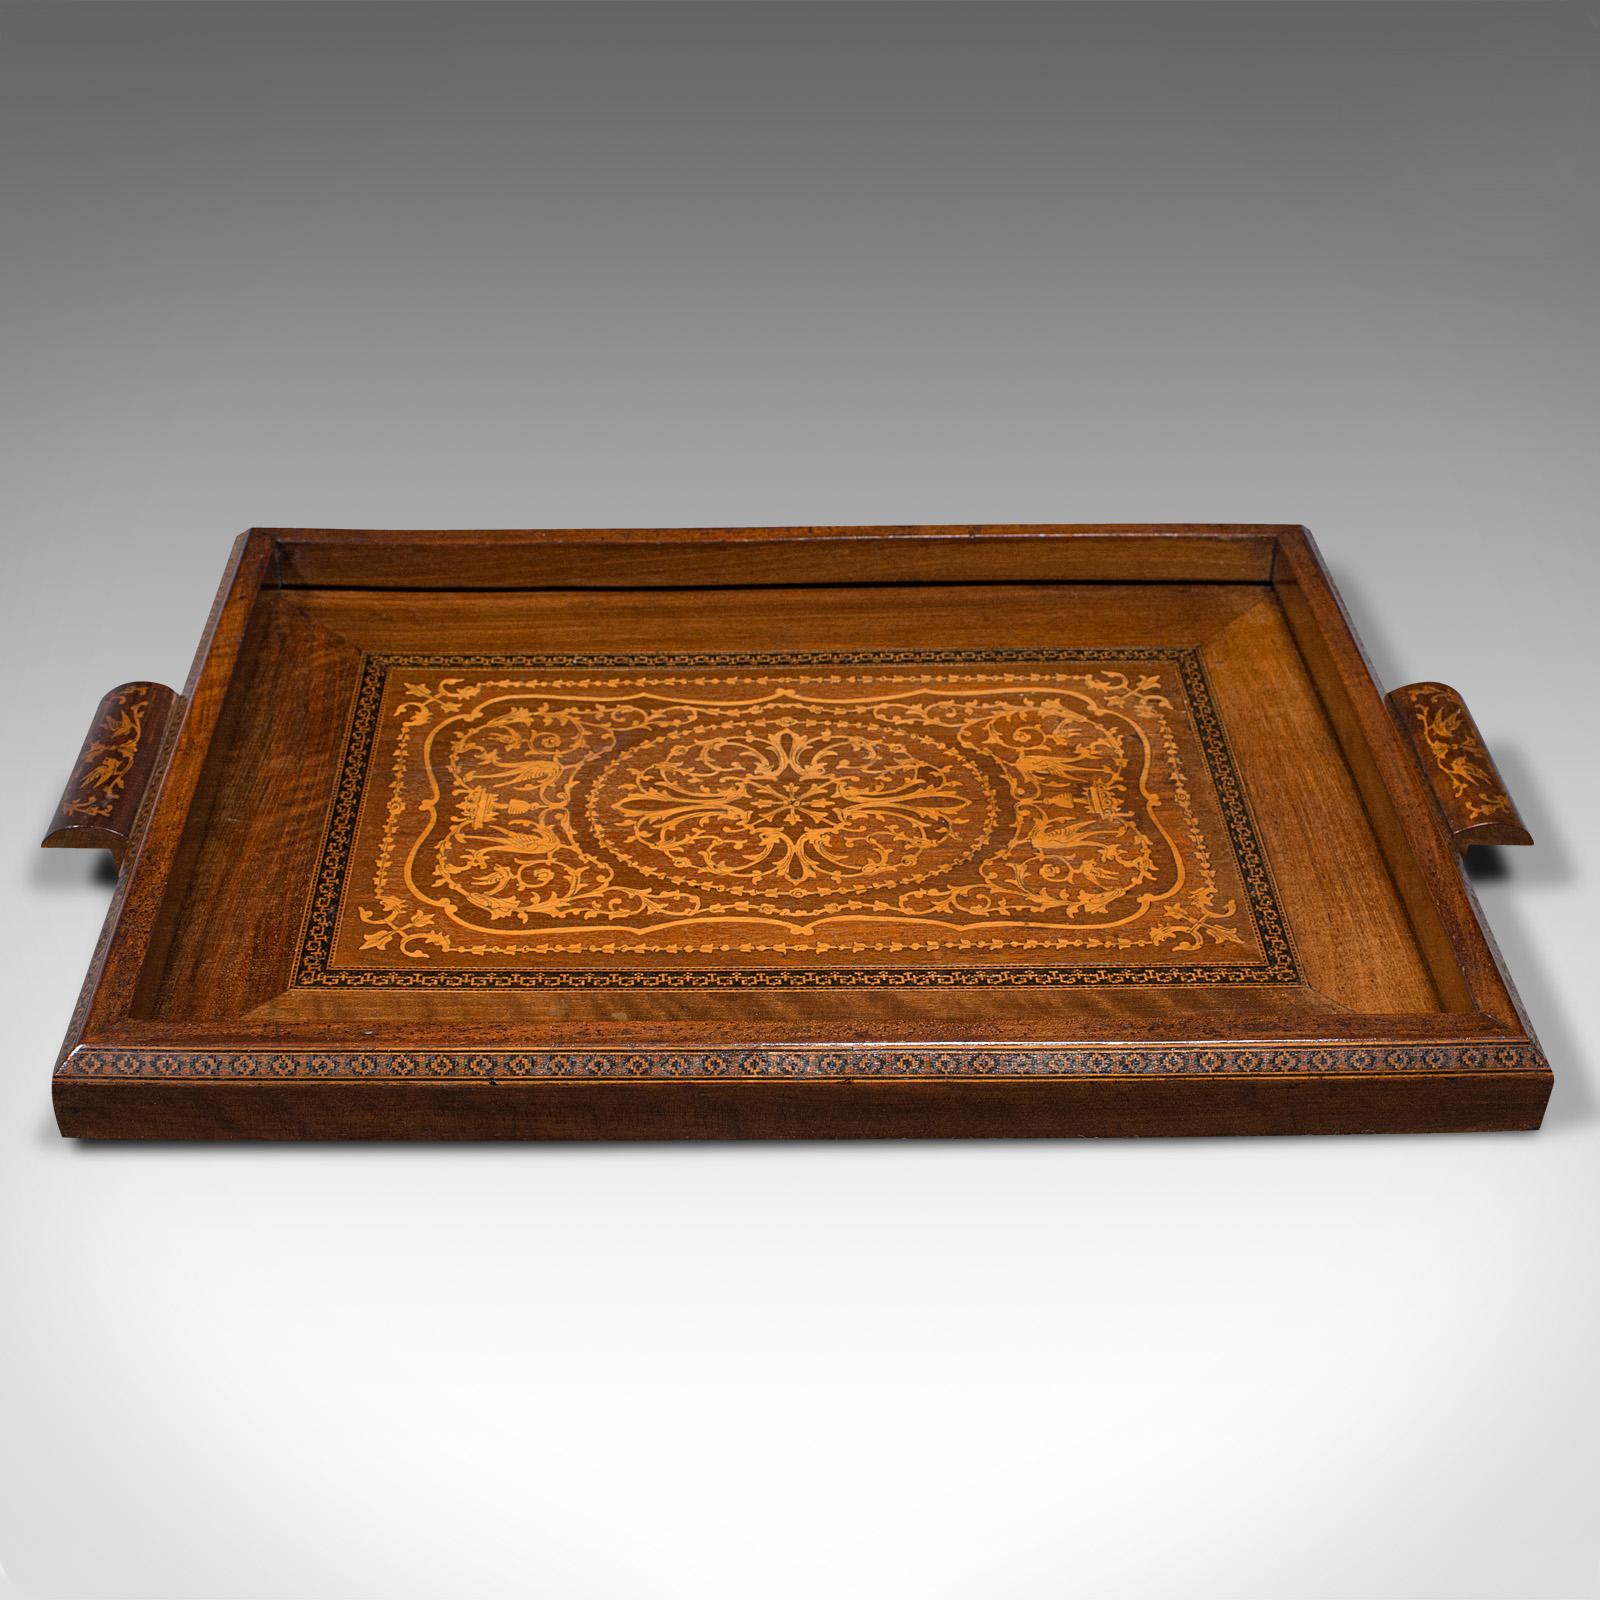 This is an antique inlaid serving tray. An Anglo-Indian, mahogany and boxwood Colonial afternoon tea slide, dating to the late Victorian period, circa 1900.

Enthusiastically inlaid tray with fine decorative appeal
Displays a desirable aged